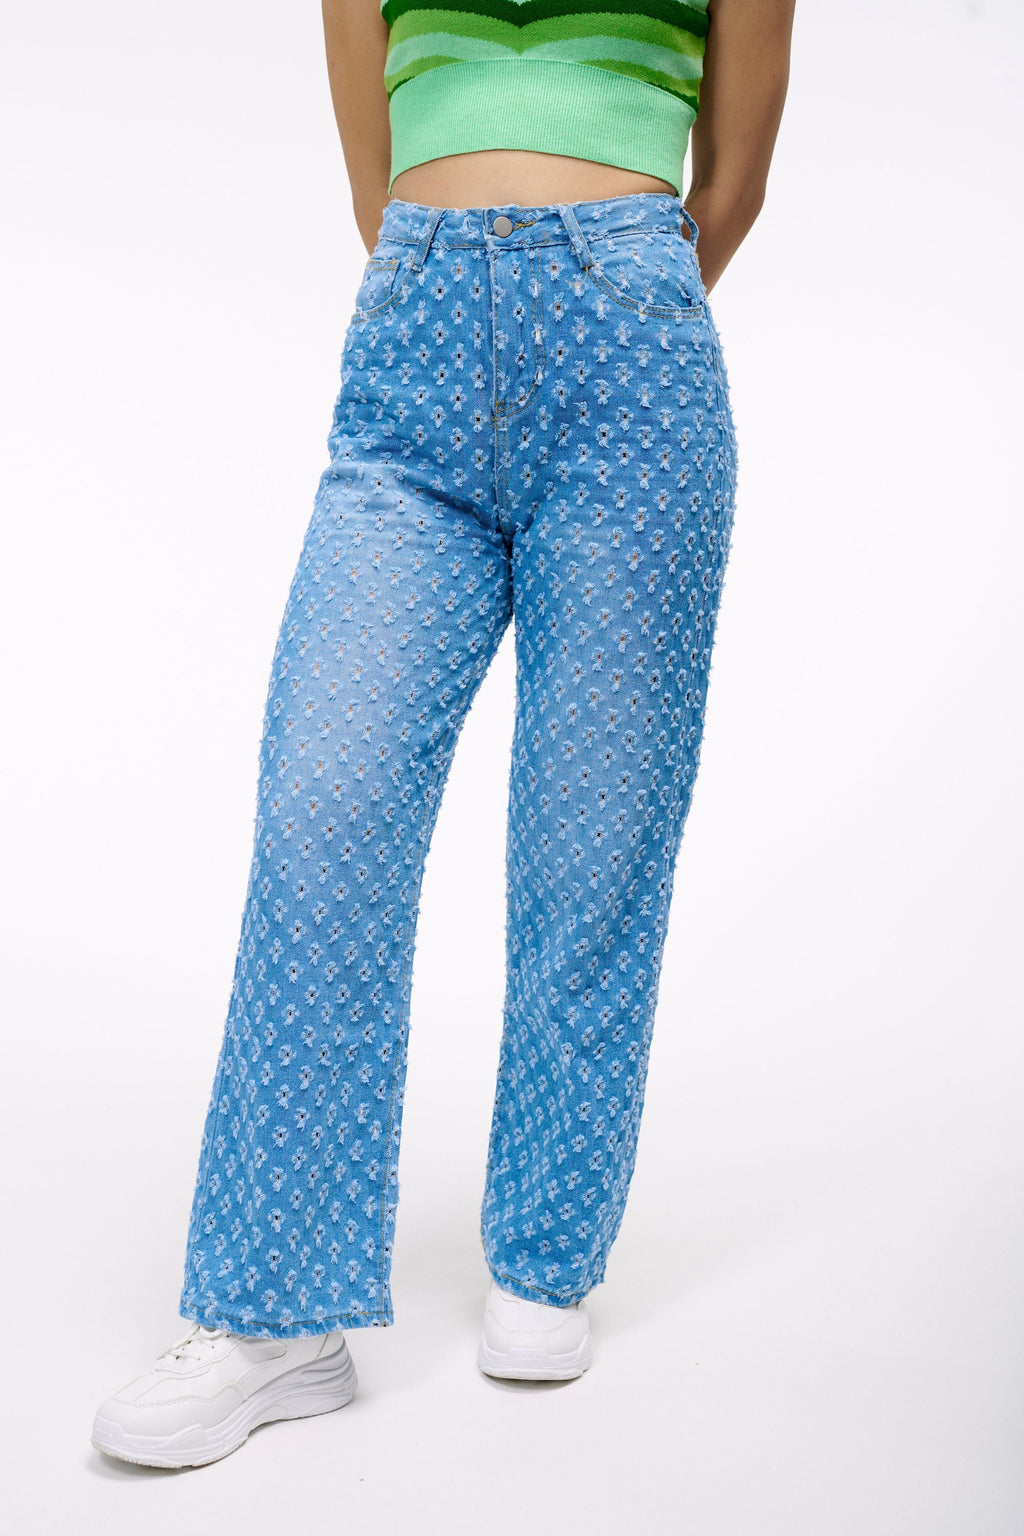 The Star Crossed Jeans | Your New Favorite Pants | Relaxed Fit Mid Wash Denim with a High Waist and Allover Cutout Detail | Goose Taffy